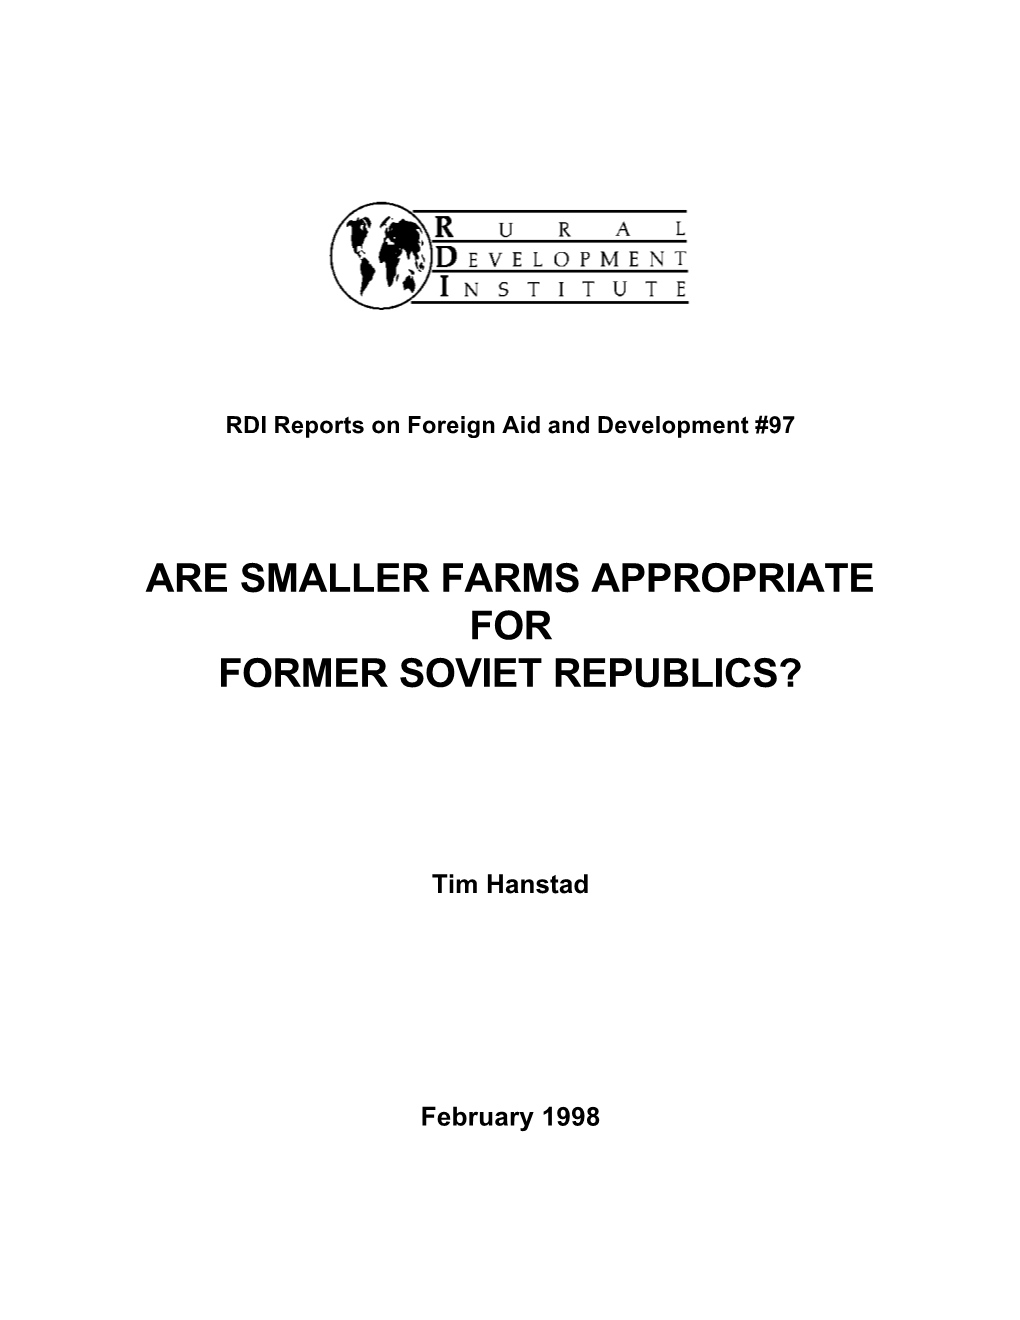 Are Smaller Farms Appropriate for Former Soviet Republics?